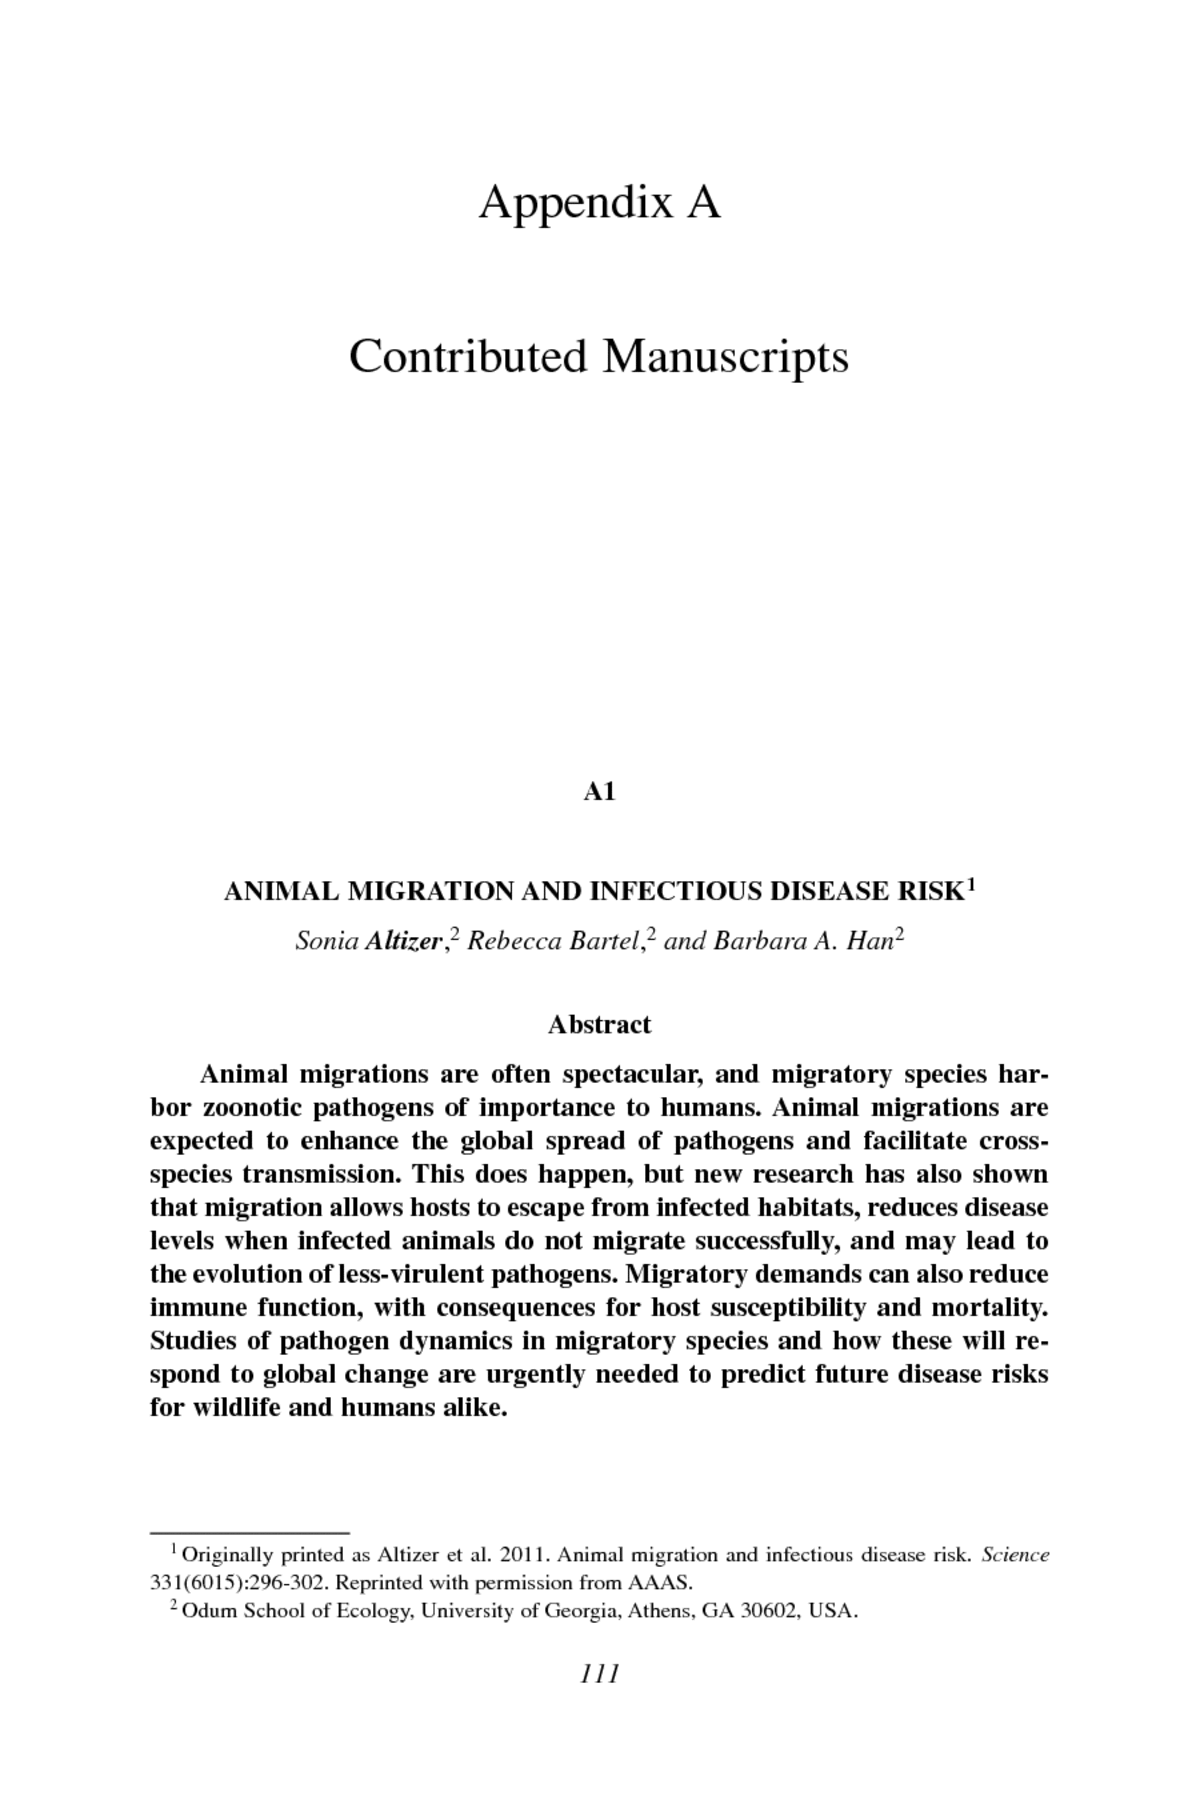 Appendix A: Contributed Manuscripts, The Influence of Global Environmental  Change on Infectious Disease Dynamics: Workshop Summary